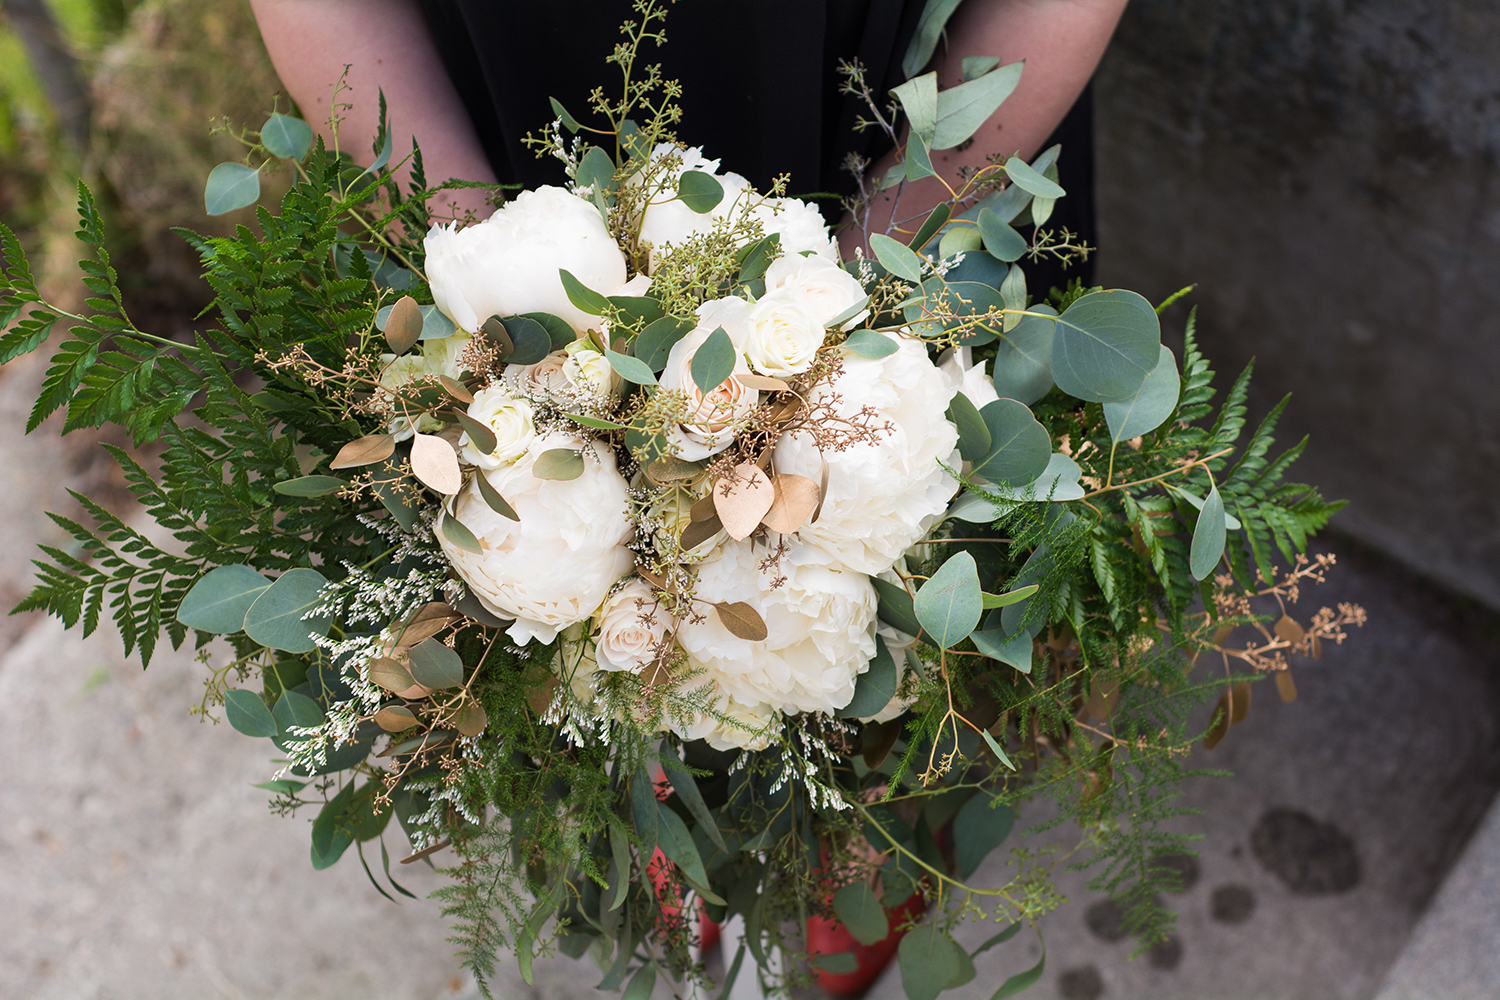 Bridal bouquet with white peonies and eucalyptus | designed by Natasha Price and photo by Sean Carpenter